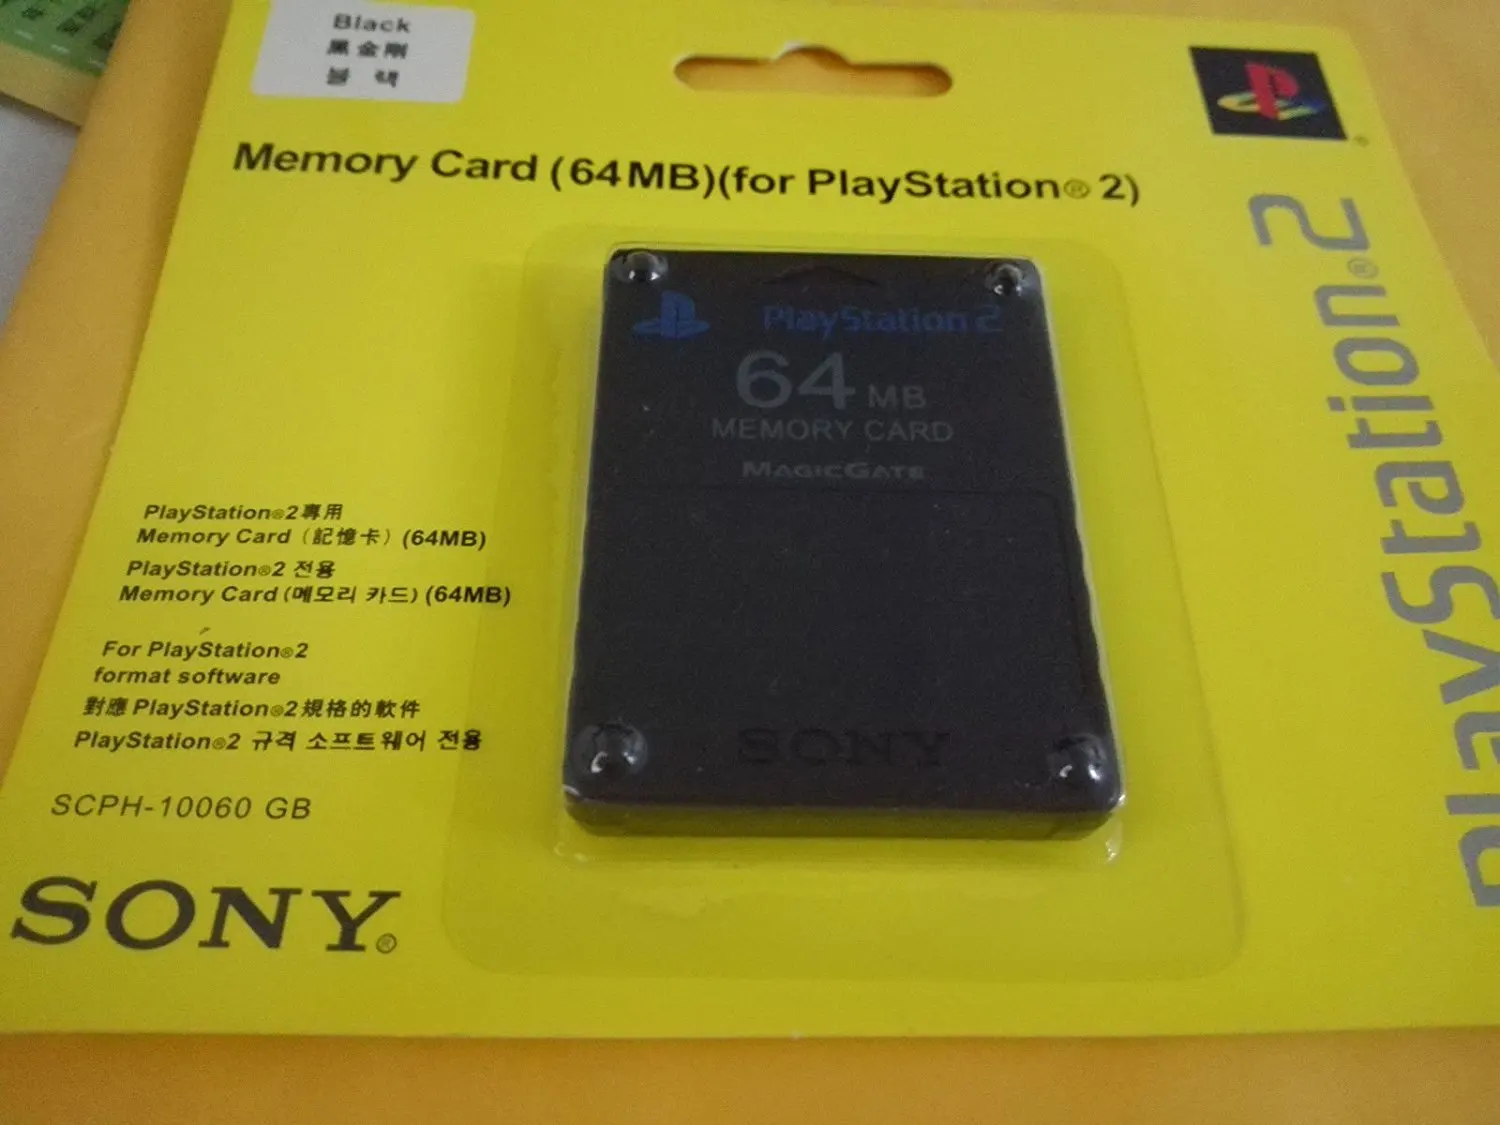 how many ps2 game saves for 128mb memory card